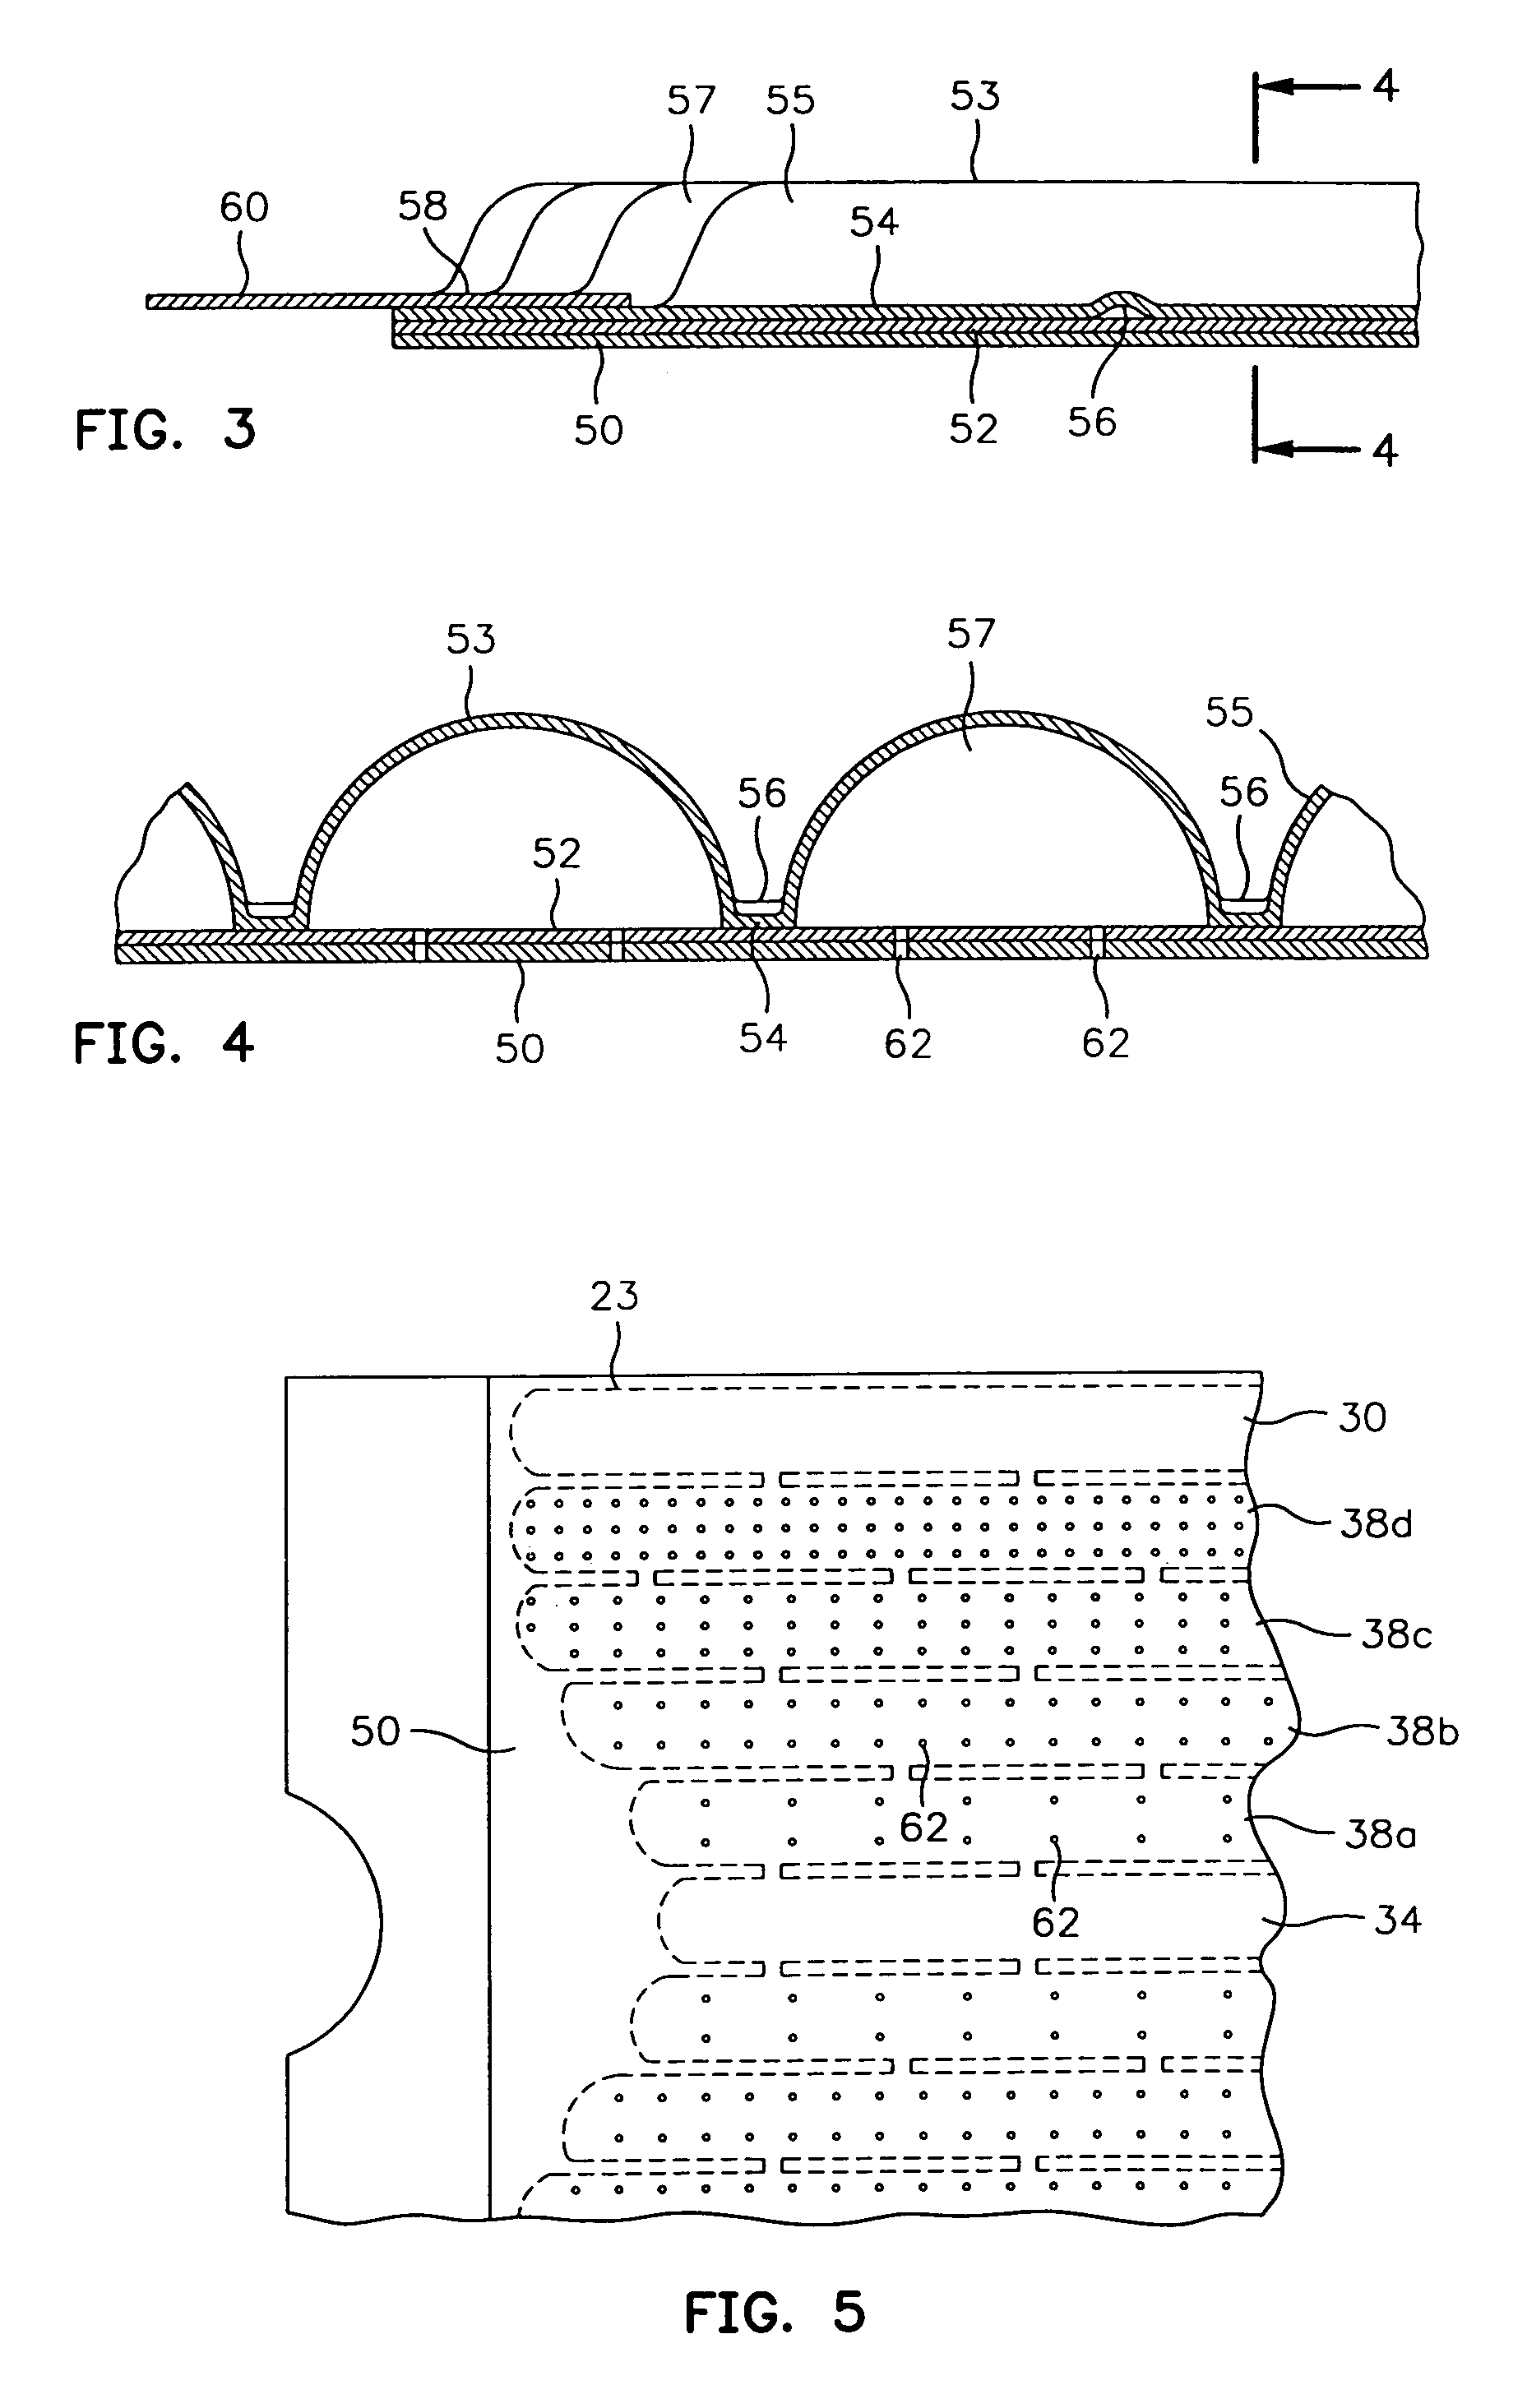 Surgical barrier device incorporating an inflatable thermal blanket with a surgical drape to provide thermal control and surgical access